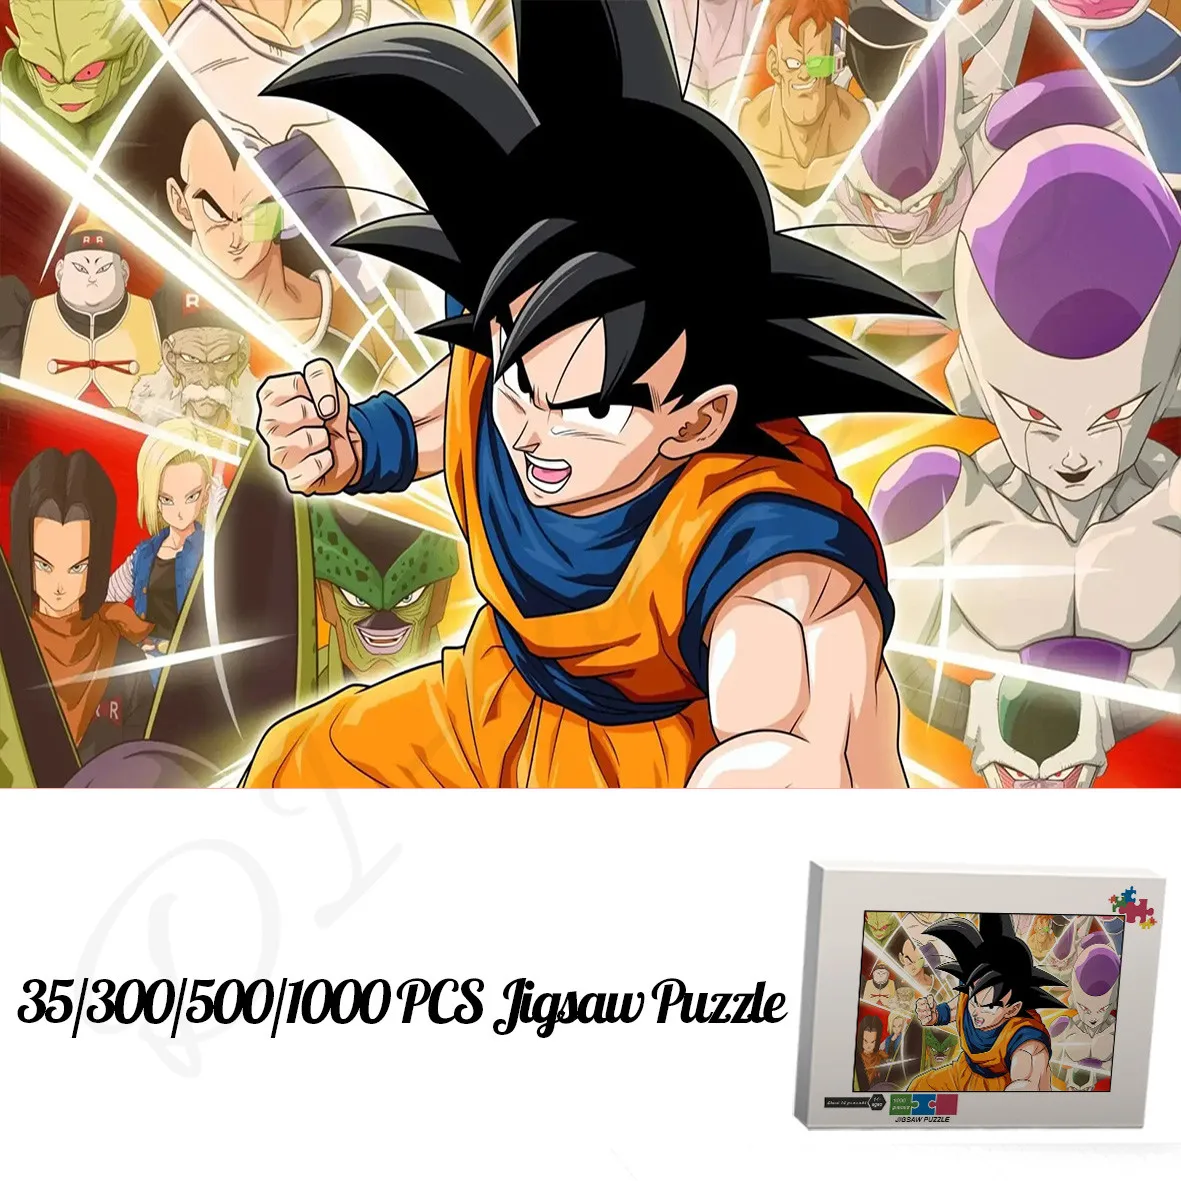 Goku Jigsaw Puzzles for Kids and Adults Classic Anime Dragon Ball 1000 Pieces Wooden Puzzles Educational Toys for Entertainment bristlegrass wooden jigsaw puzzles 500 1000 pieces bean flower bird giuseppe castiglione educational toy chinese paintings decor